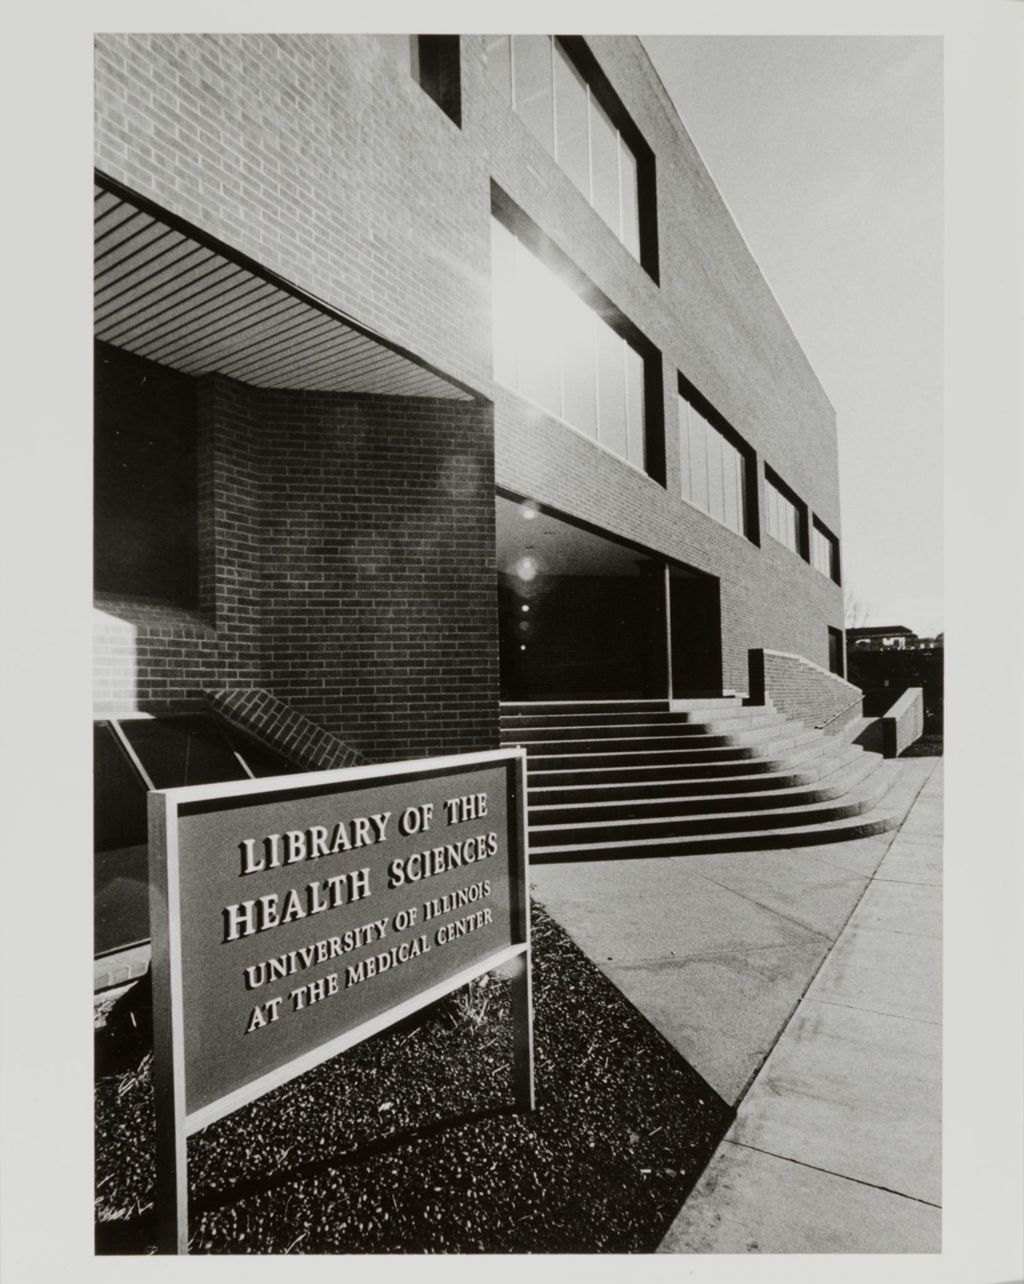 Miniature of Exterior of the Library of the Health Sciences, including building sign